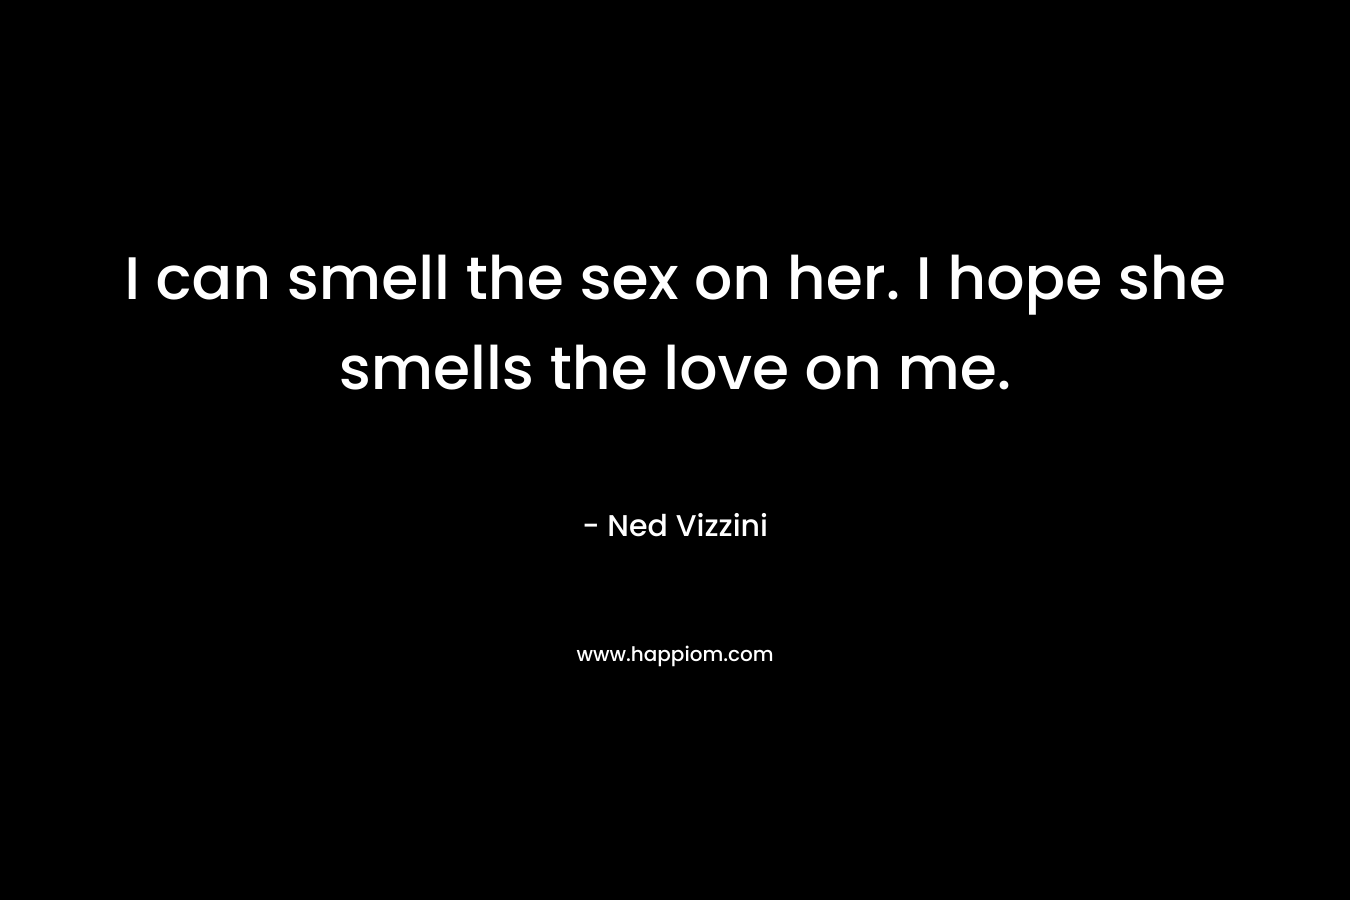 I can smell the sex on her. I hope she smells the love on me. – Ned Vizzini